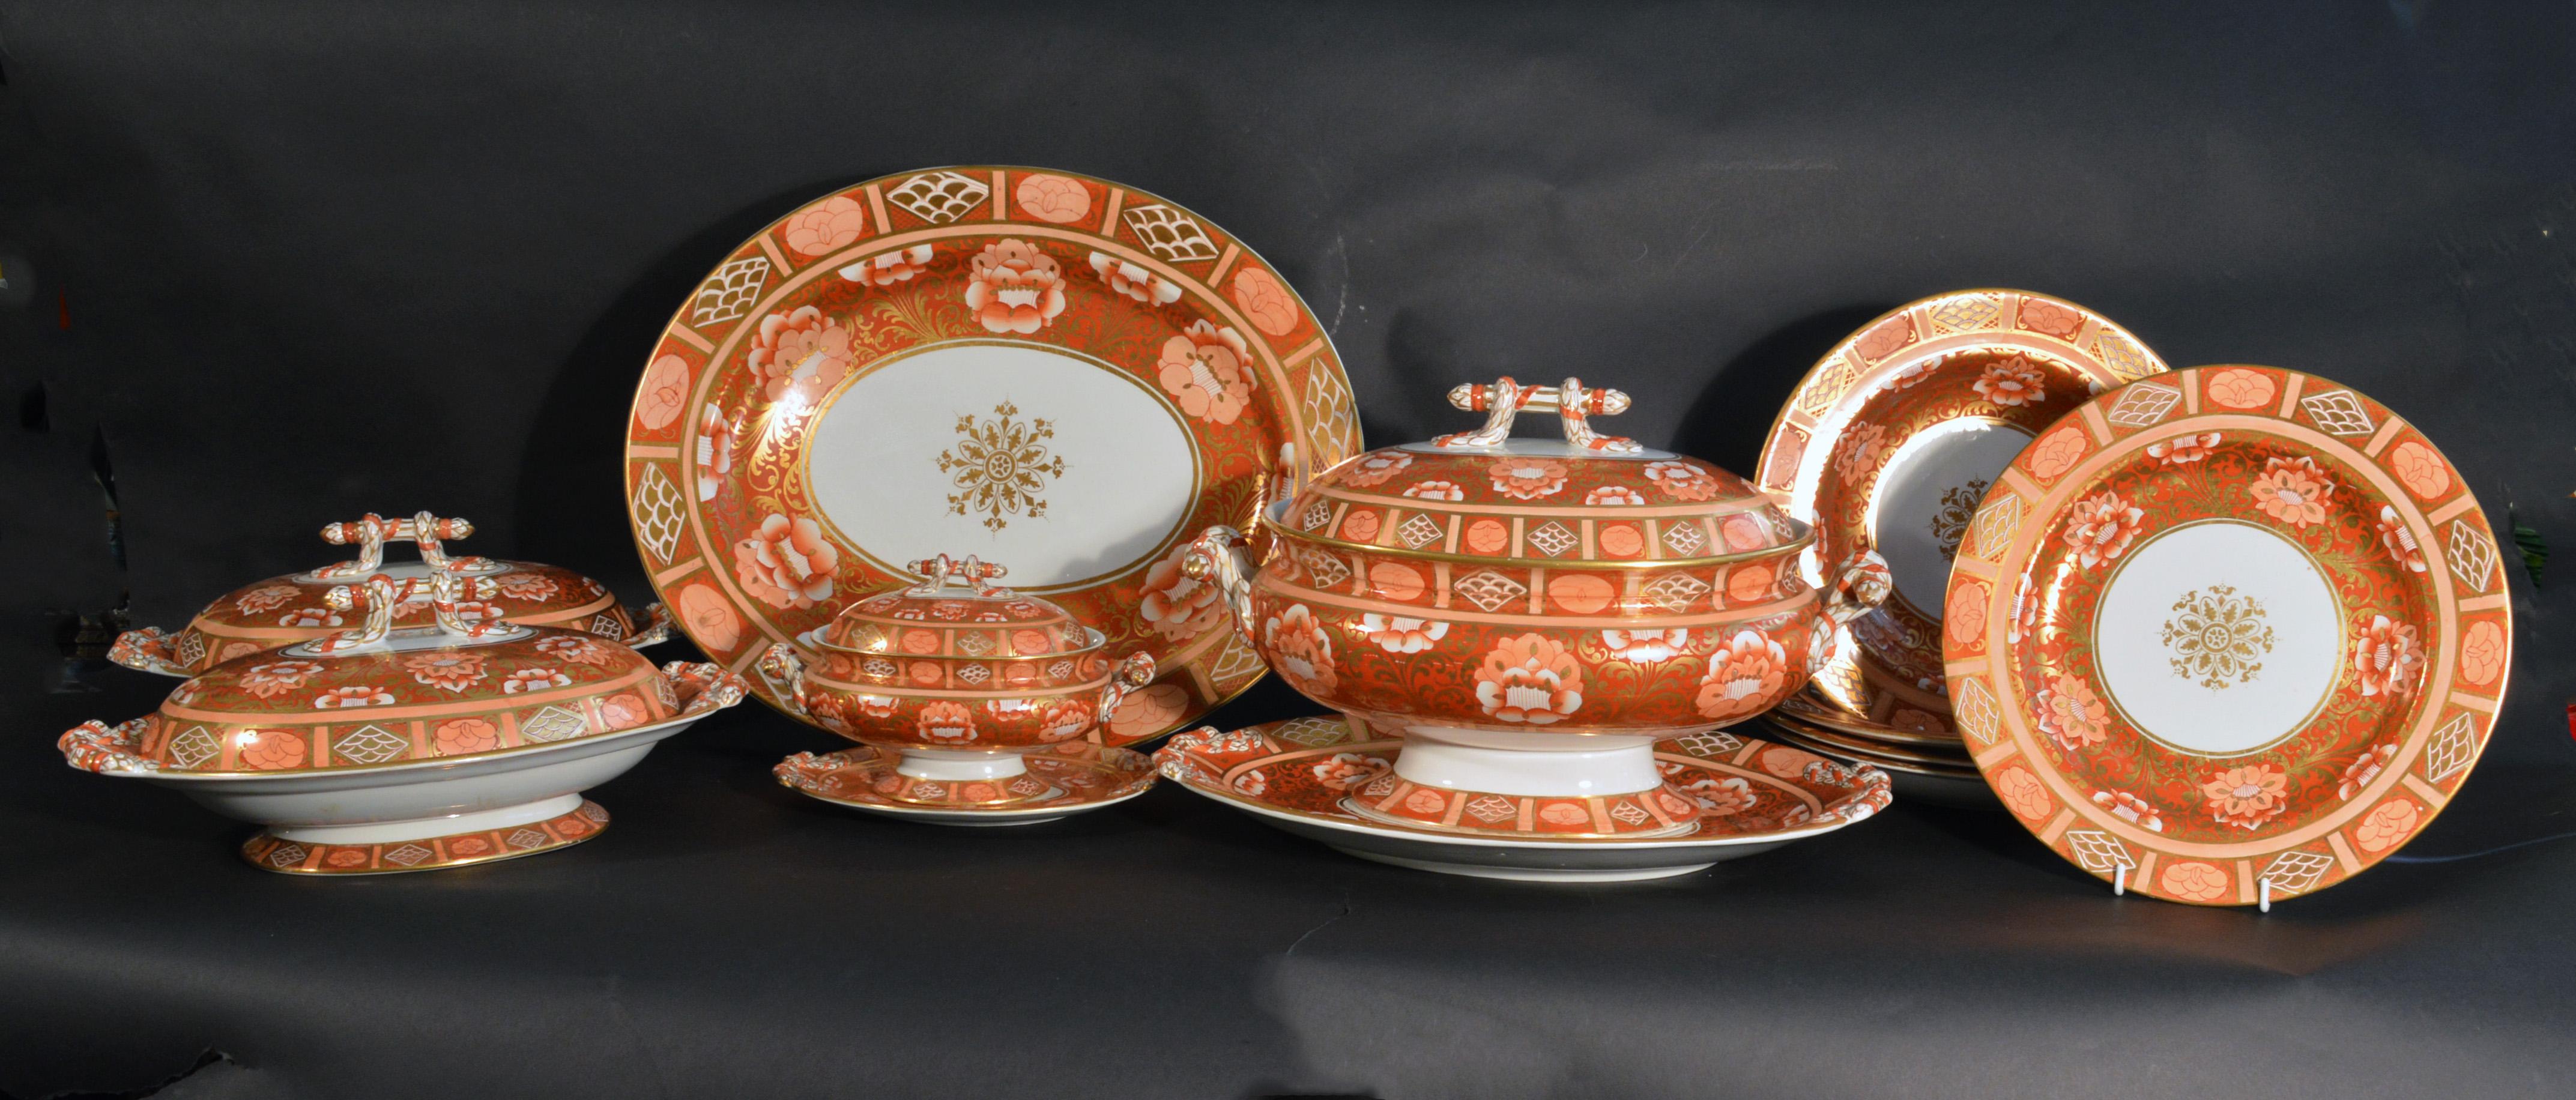 Ashworth Brothers Ironstone dinner service, 
circa 1893,
Forty-five pieces,
Pattern B3369, 

The forty-five piece painted Ashworth ironstone burnt-orange floral patterned dinner service has a central gilt rosette surrounded by a wide 'brocade'